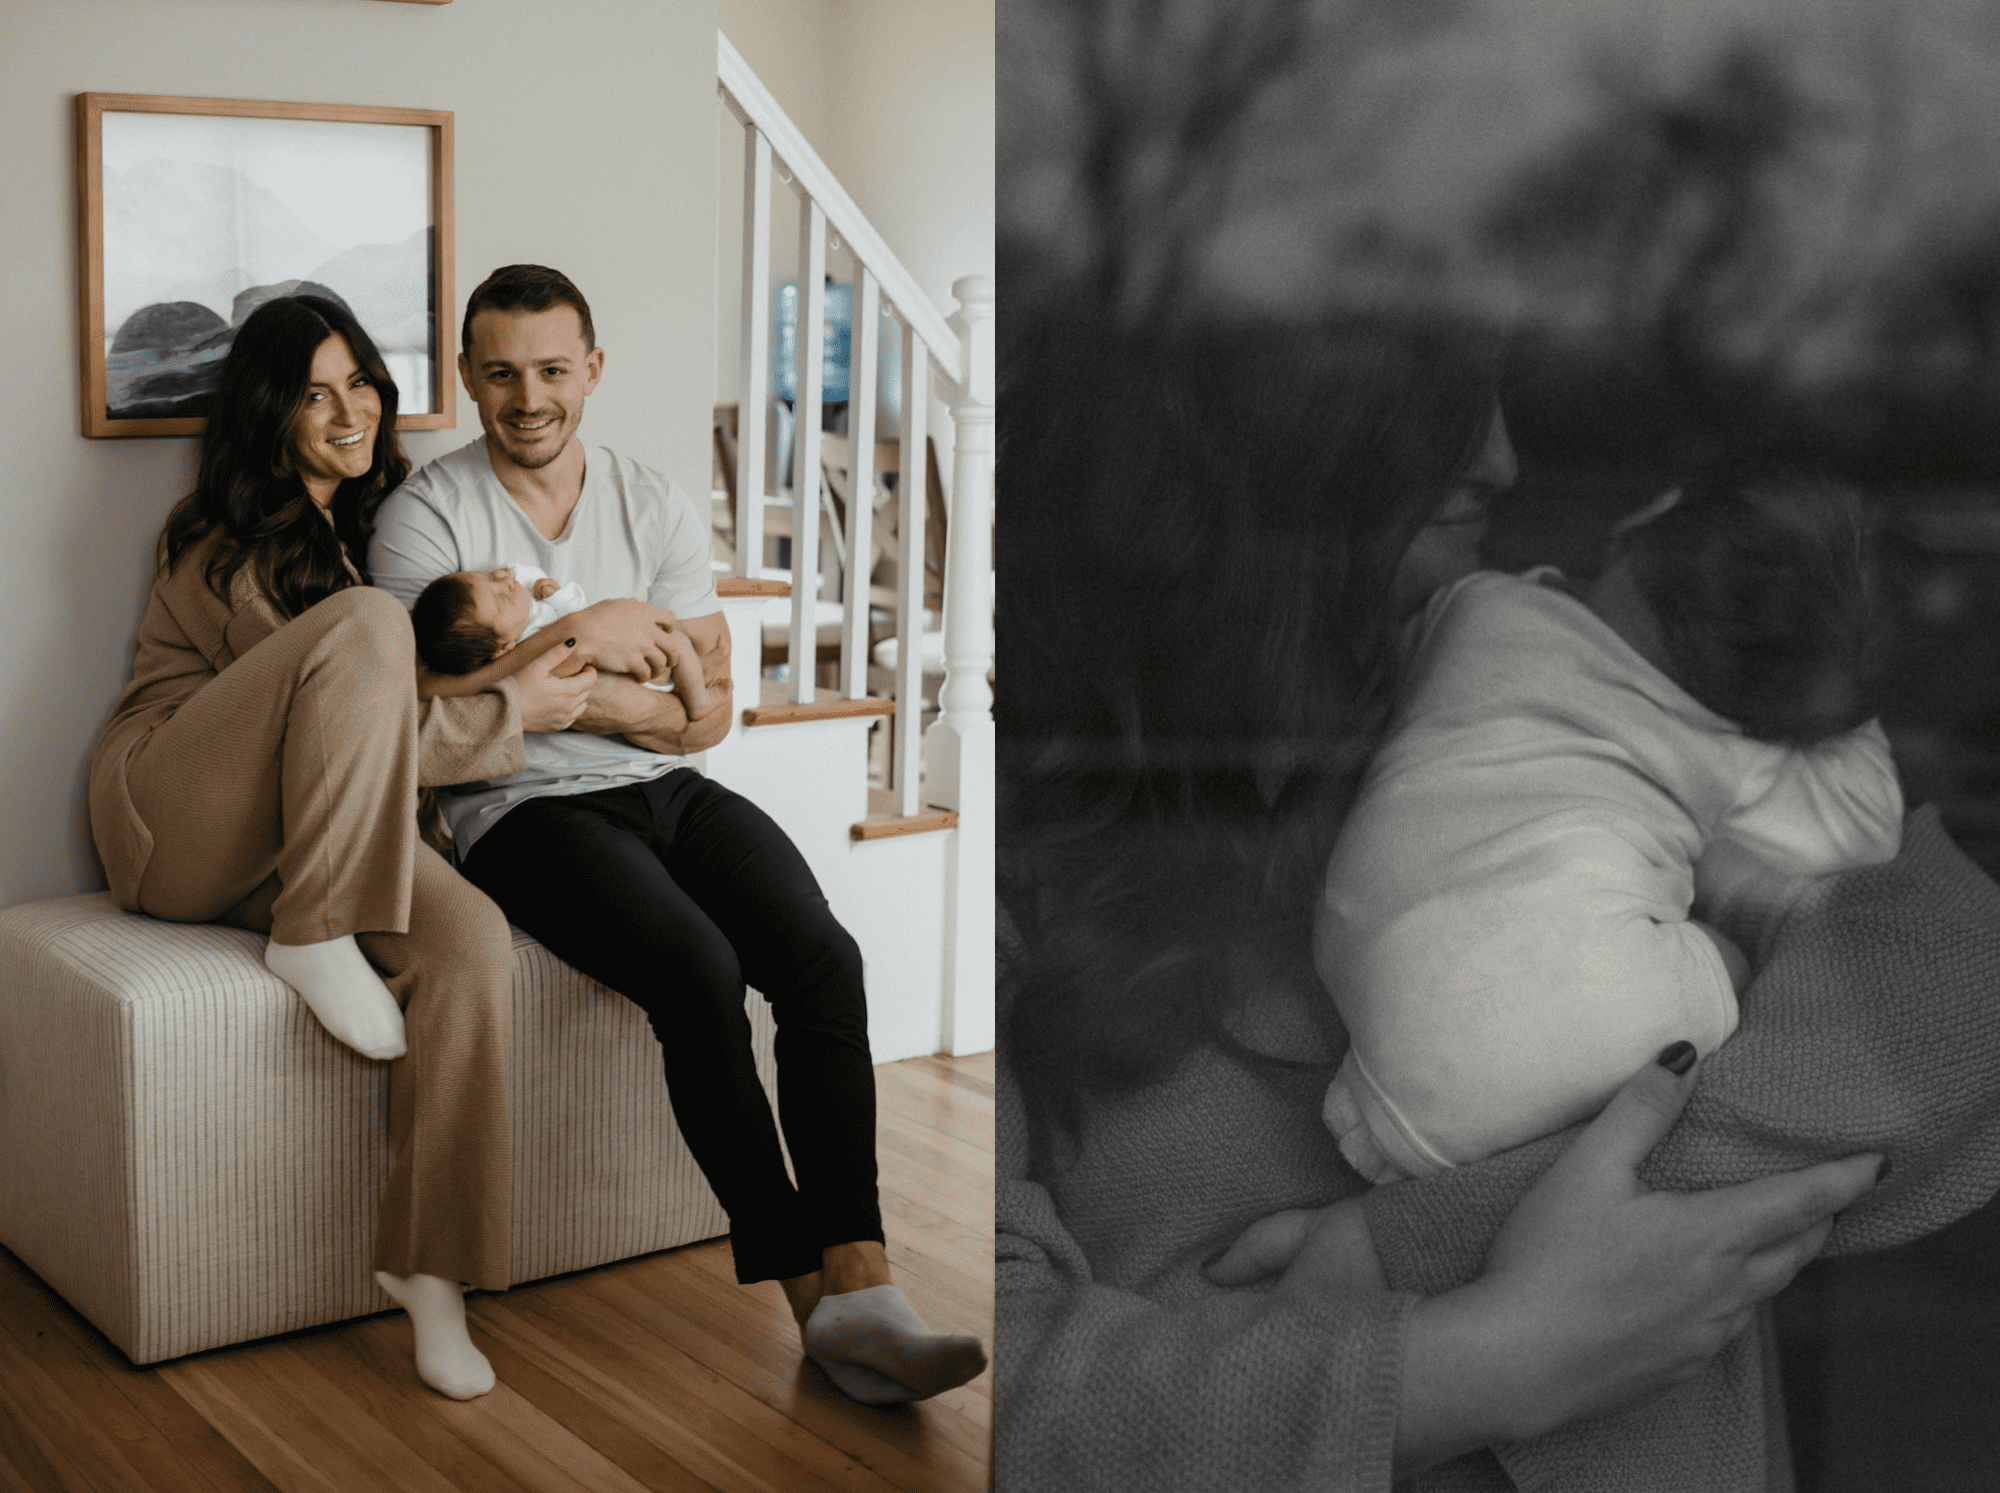 In home newborn photoshoot. Neutral color family photos. New York family photographers. Black and white family maternity shoot. Newborn portrait